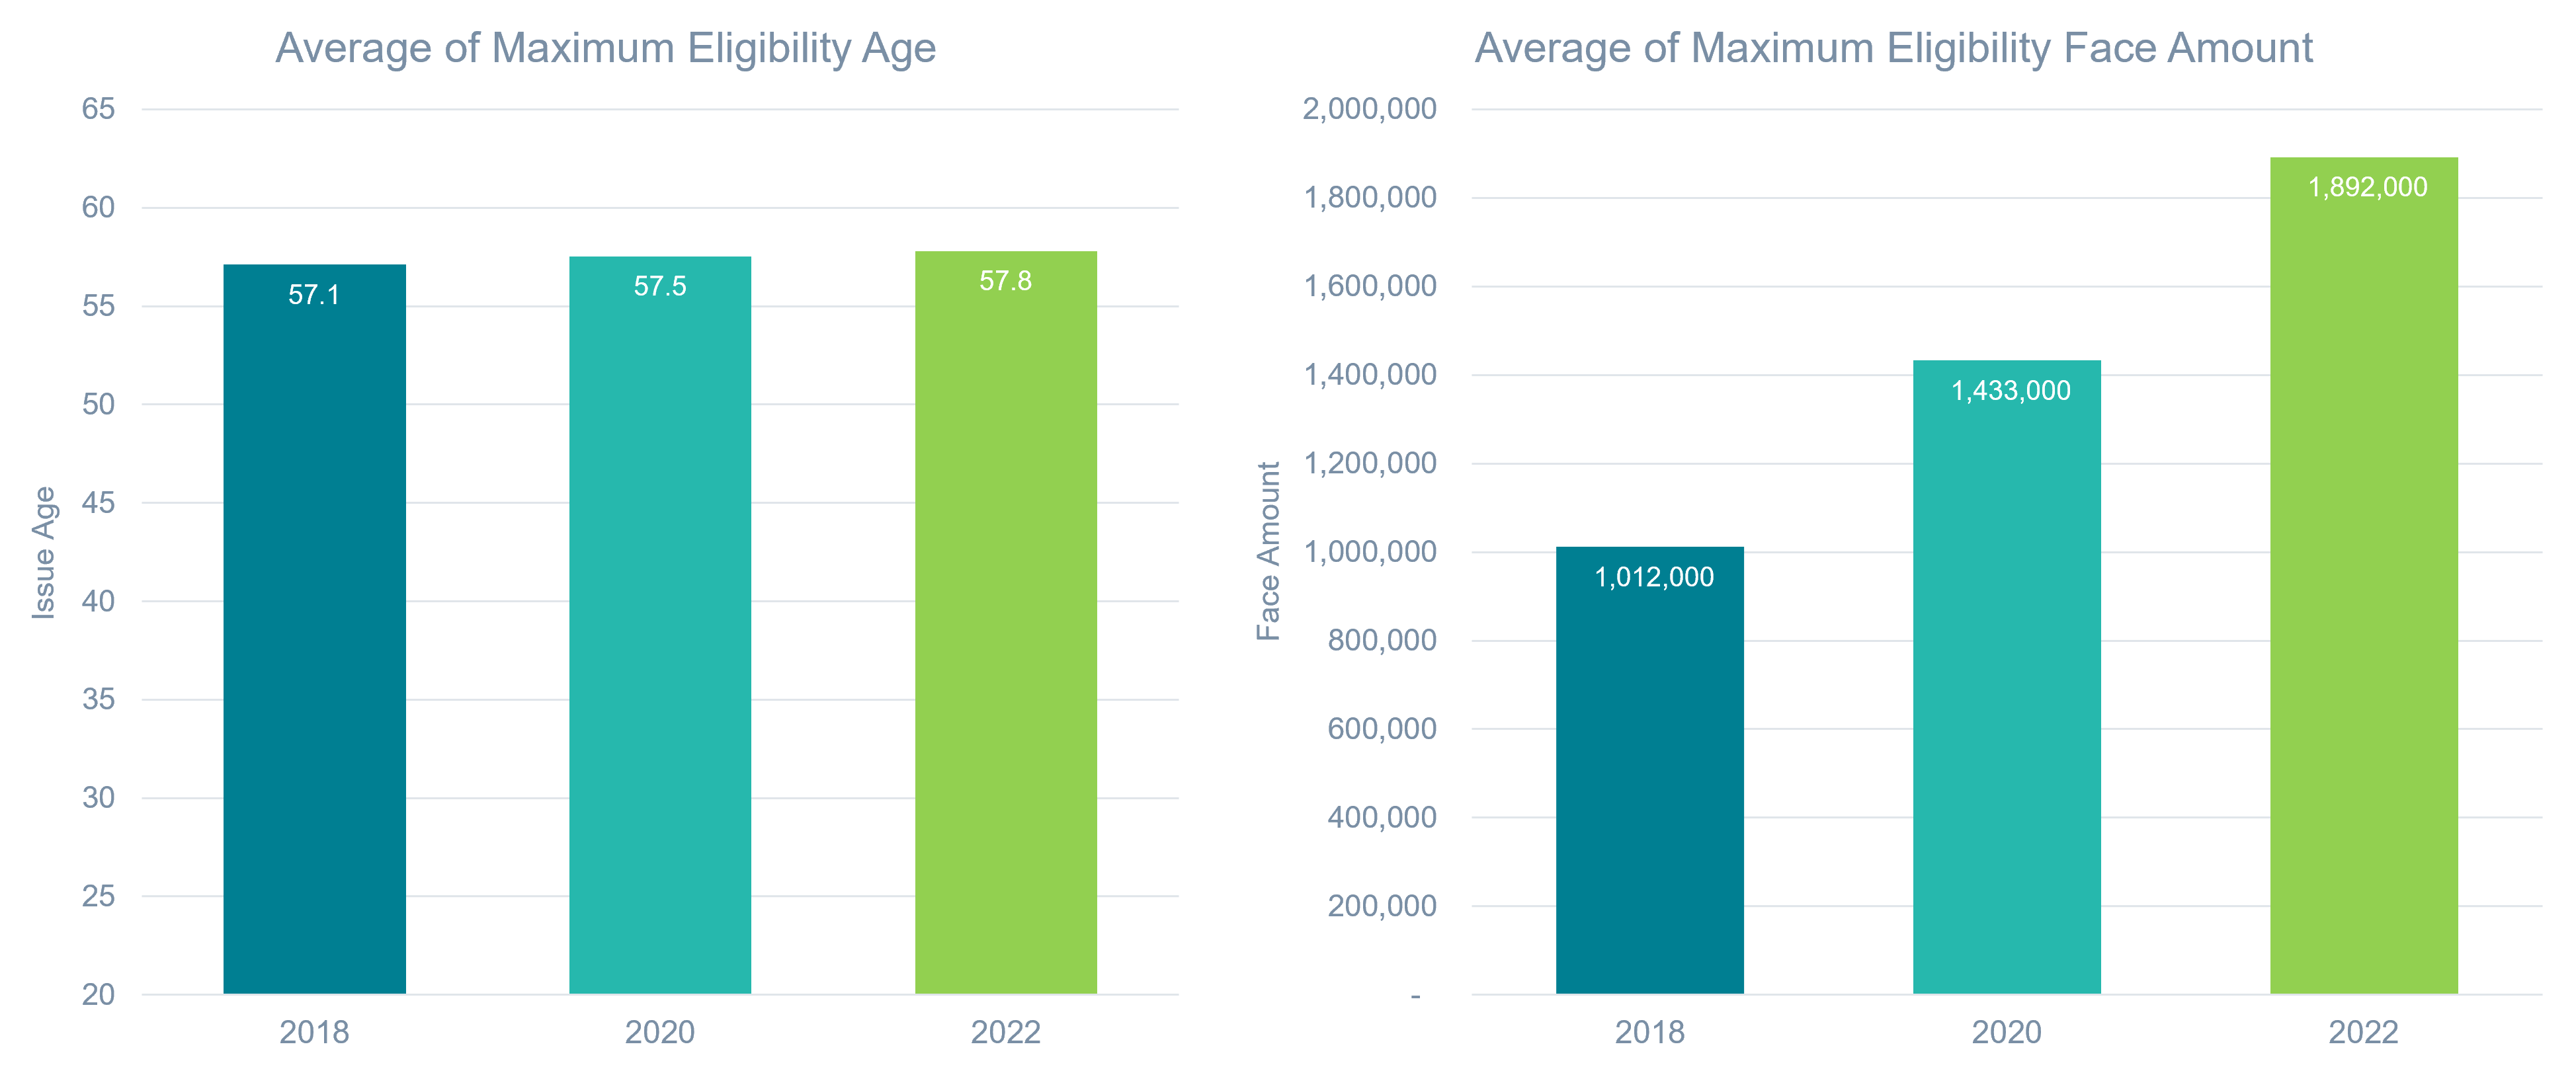 AUW Eligibility Trends Over Time 